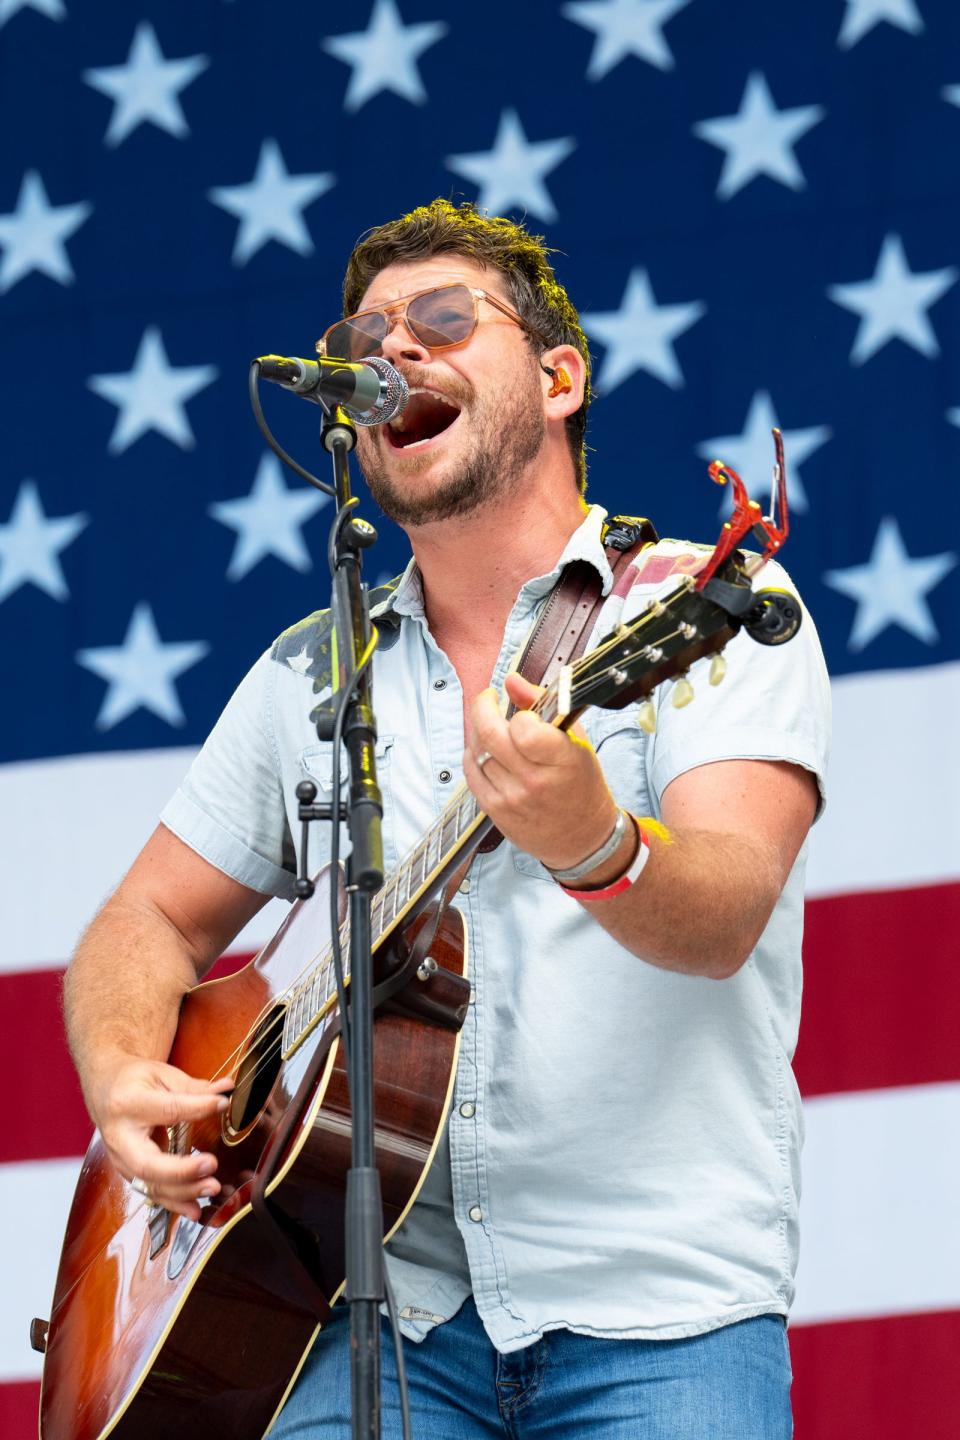 Shane Smith & The Saints perform in concert July 4 during Willie Nelson's 4th of July Picnic at Q2 Stadium in Austin, Texas.